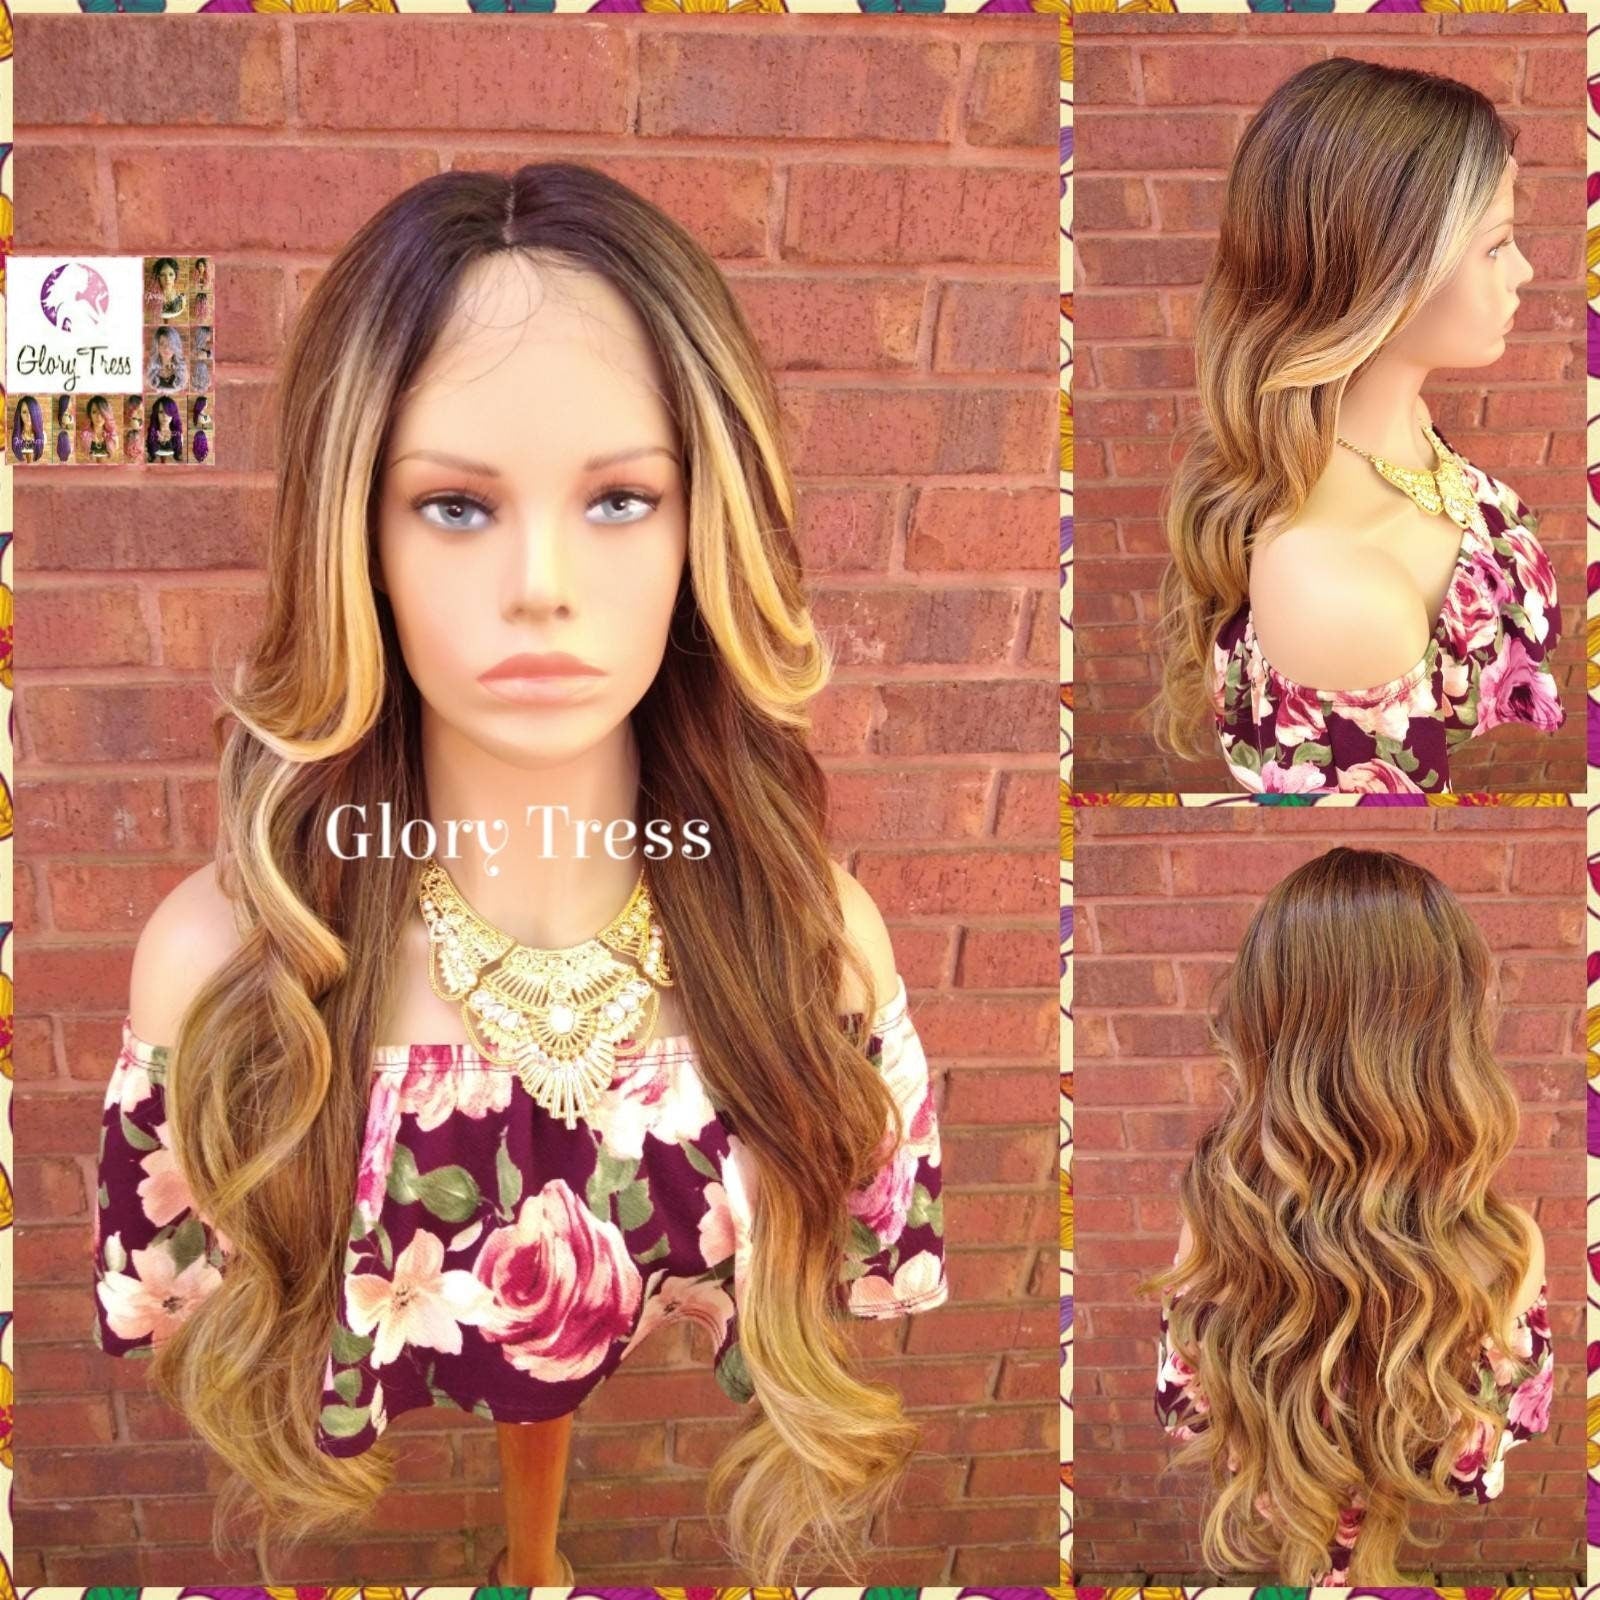 Wavy Lace Front Wig, Money Piece Highlights, Blonde Wig, Blonde Wig, Glory Tress, Wigs, Wig, Heat Safe, On Sale // Lily